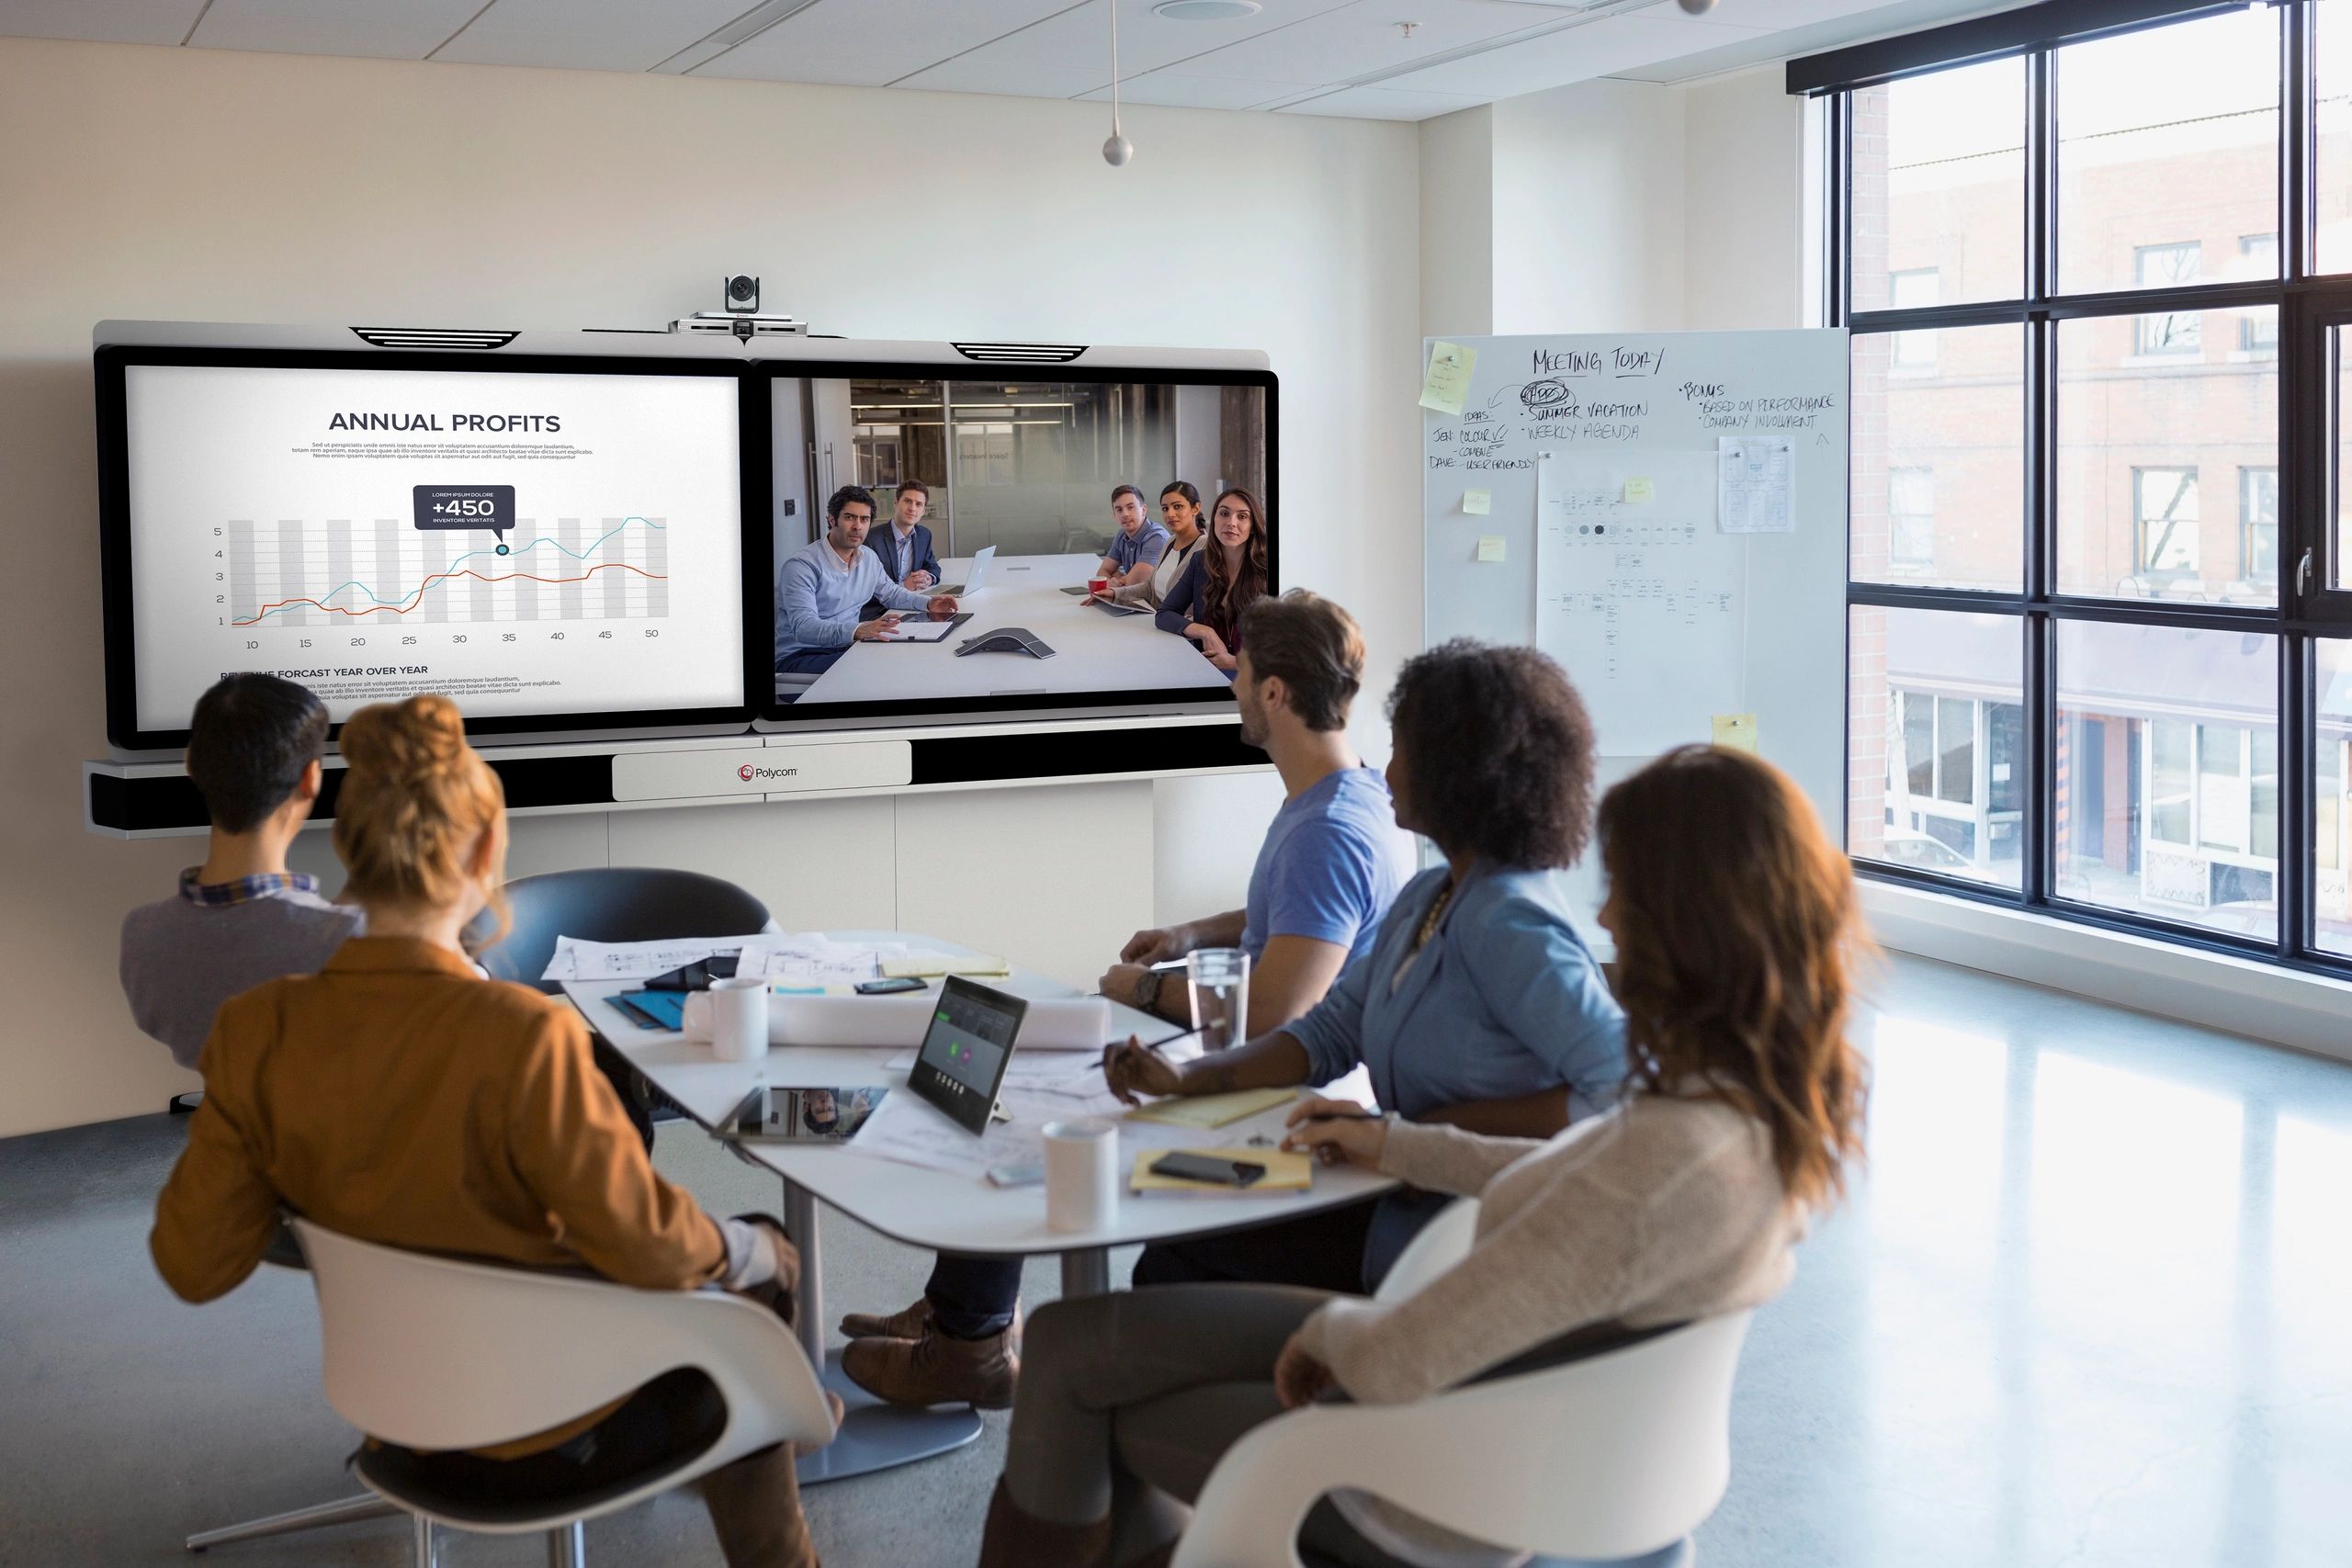 Audio Visual Video Conferencing in San Francisco, Zoom Room, Skype and Blue Jeans.